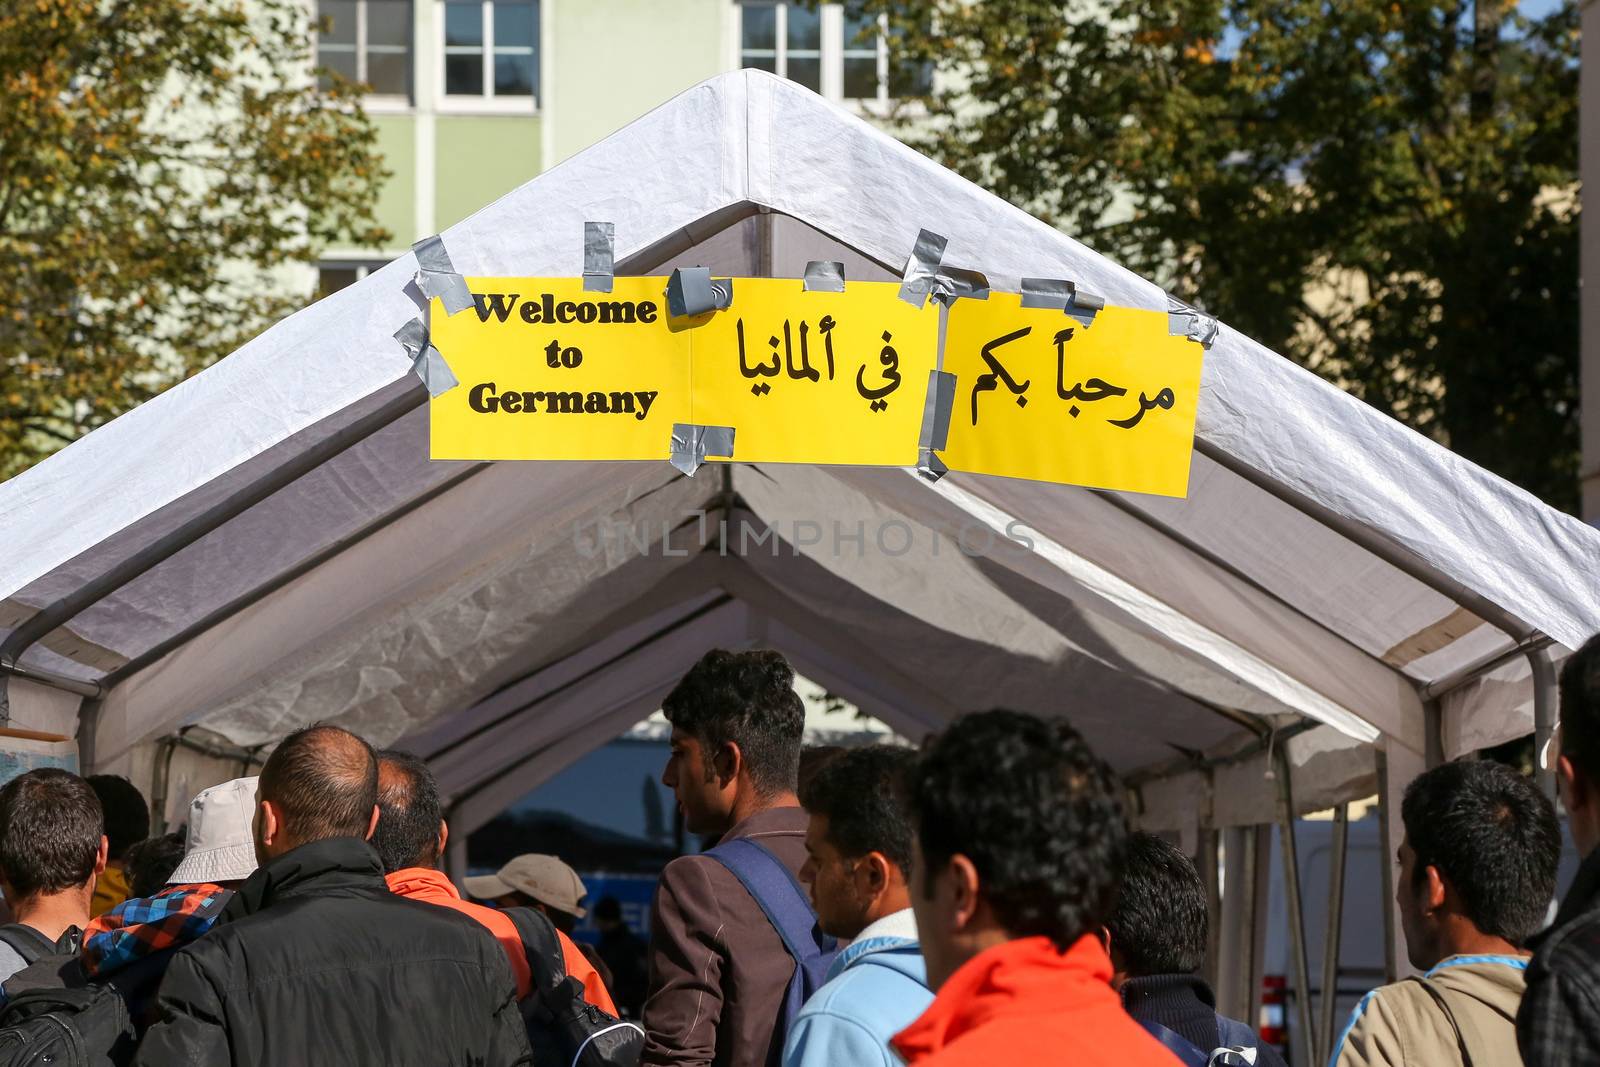 GERMANY, Passau: A sign reads Welcome to Germany as refugees wait in long queues in the border town of Passau, Germany on September 21, 2015 amid the reintroduction of border controls in Germany, Austria, and a number of other EU countries, aimed at slowing the flow of refugees from war-torn Syria.